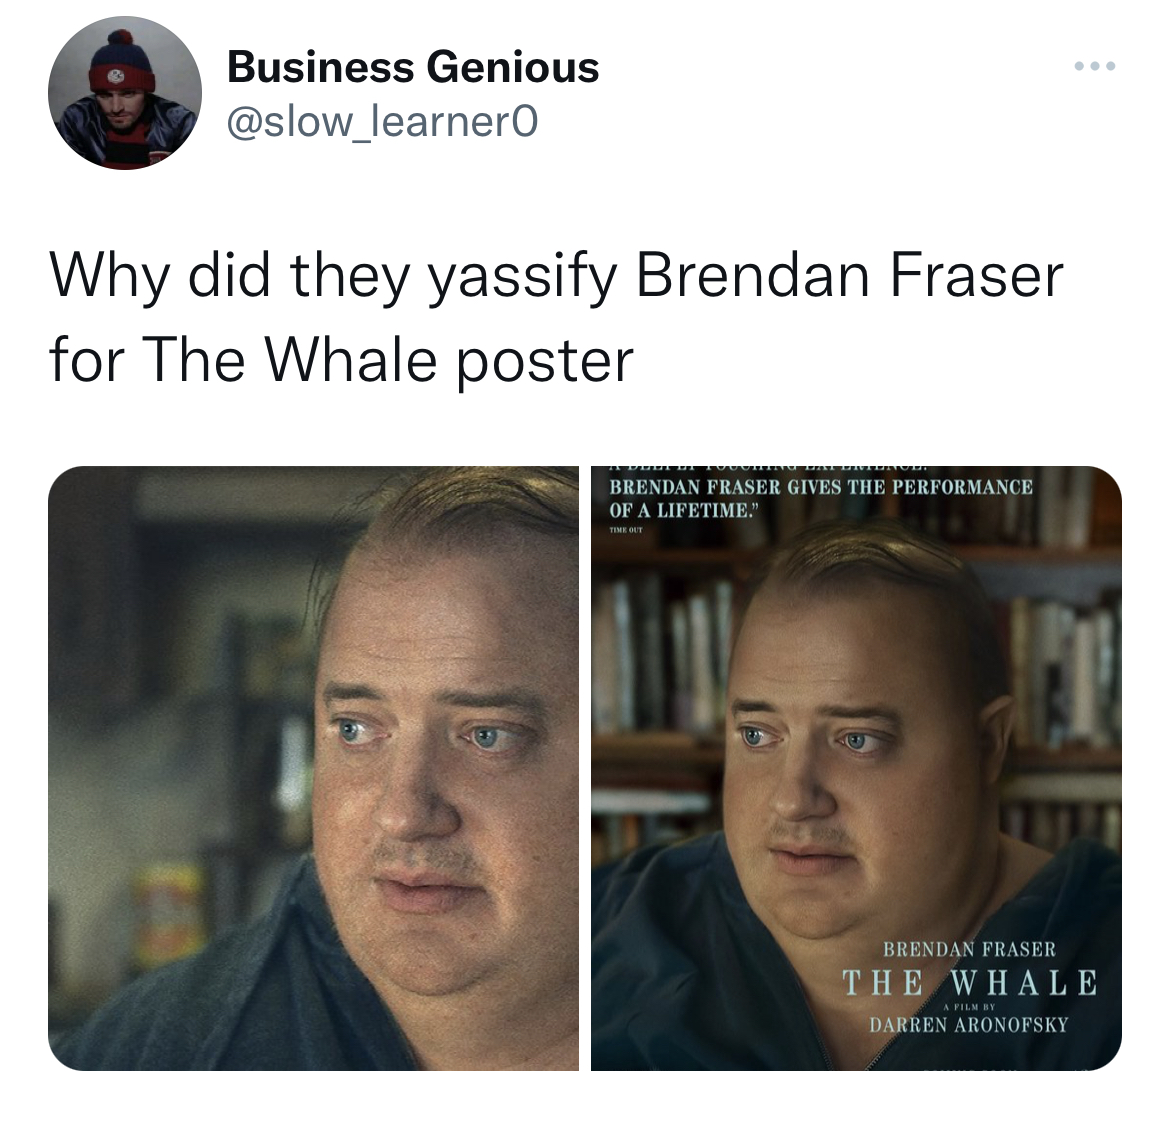 photo caption - Business Genious Why did they yassify Brendan Fraser for The Whale poster Brendan Fraser Gives The Performance Of A Lifetime. Afde Brendan Fraser The Whale Darren Aronofsky